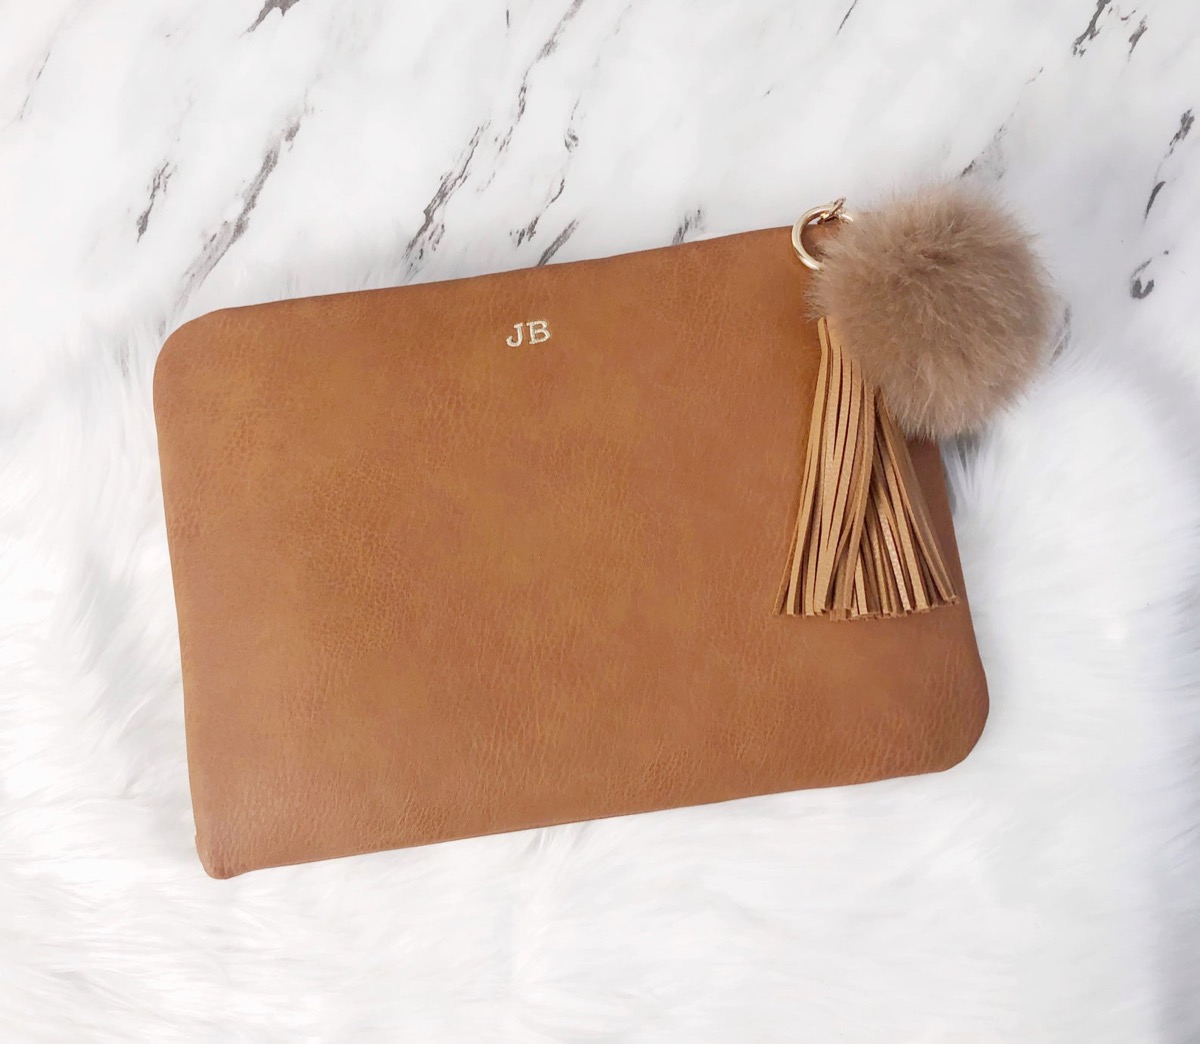 brown leather zip-top case with gold embroidered initials, a gray pom pom, and a brown tassel